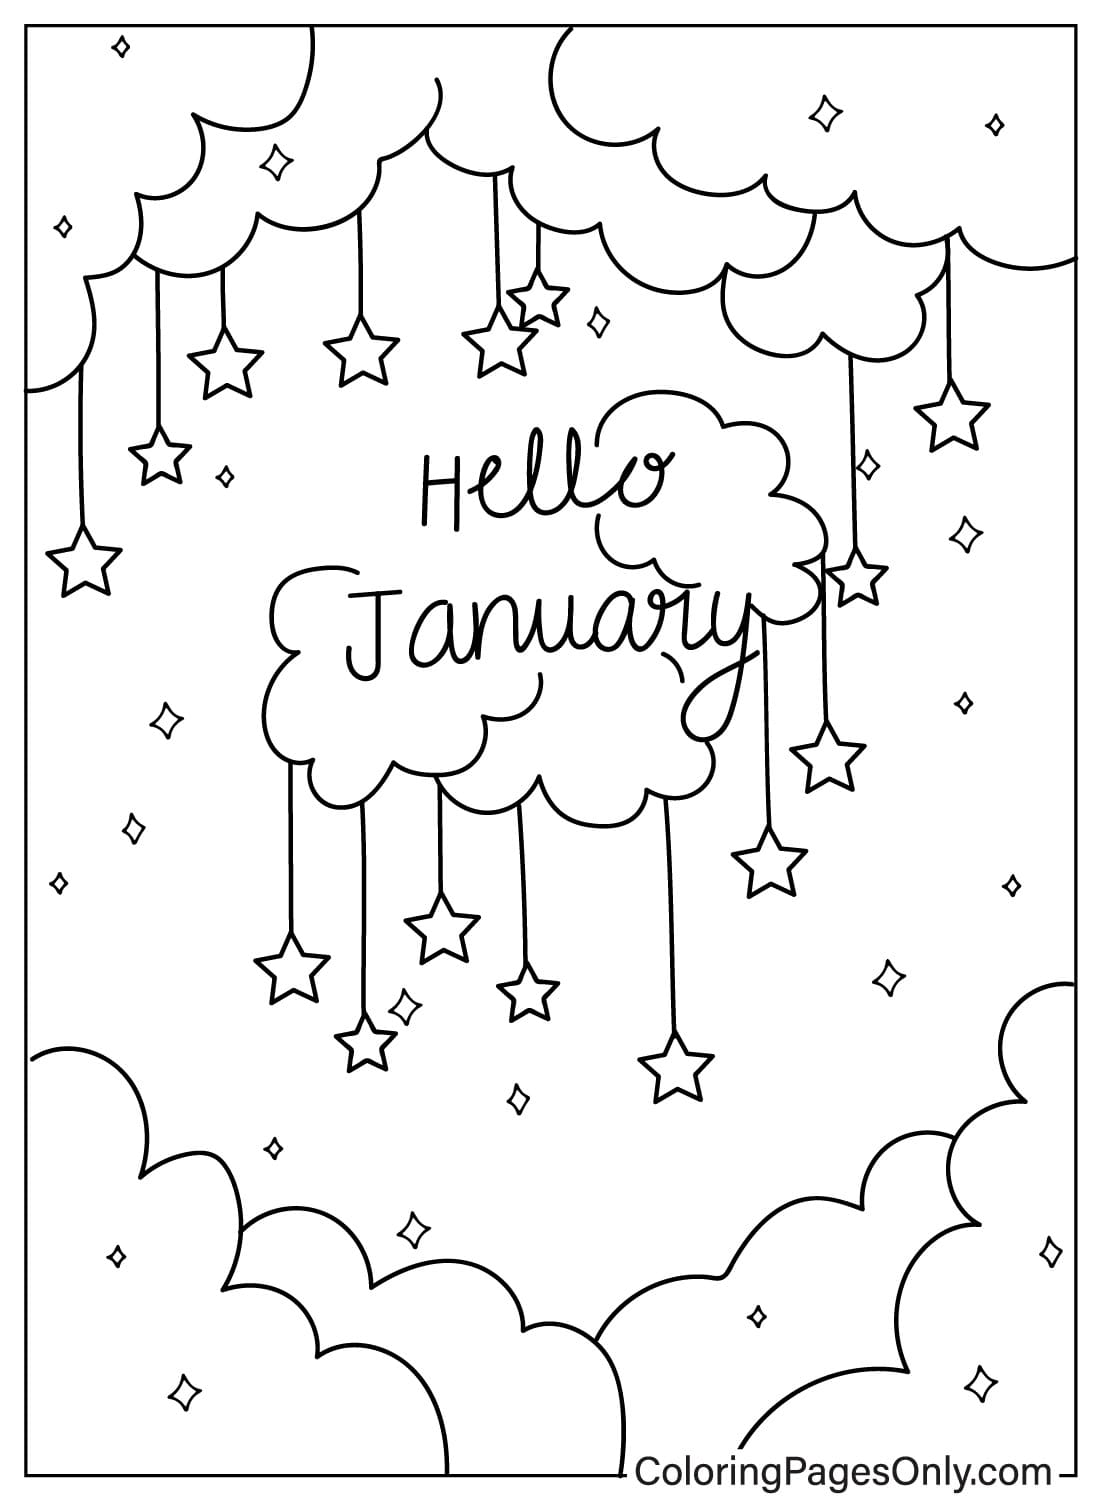 January Free Printable Coloring Page